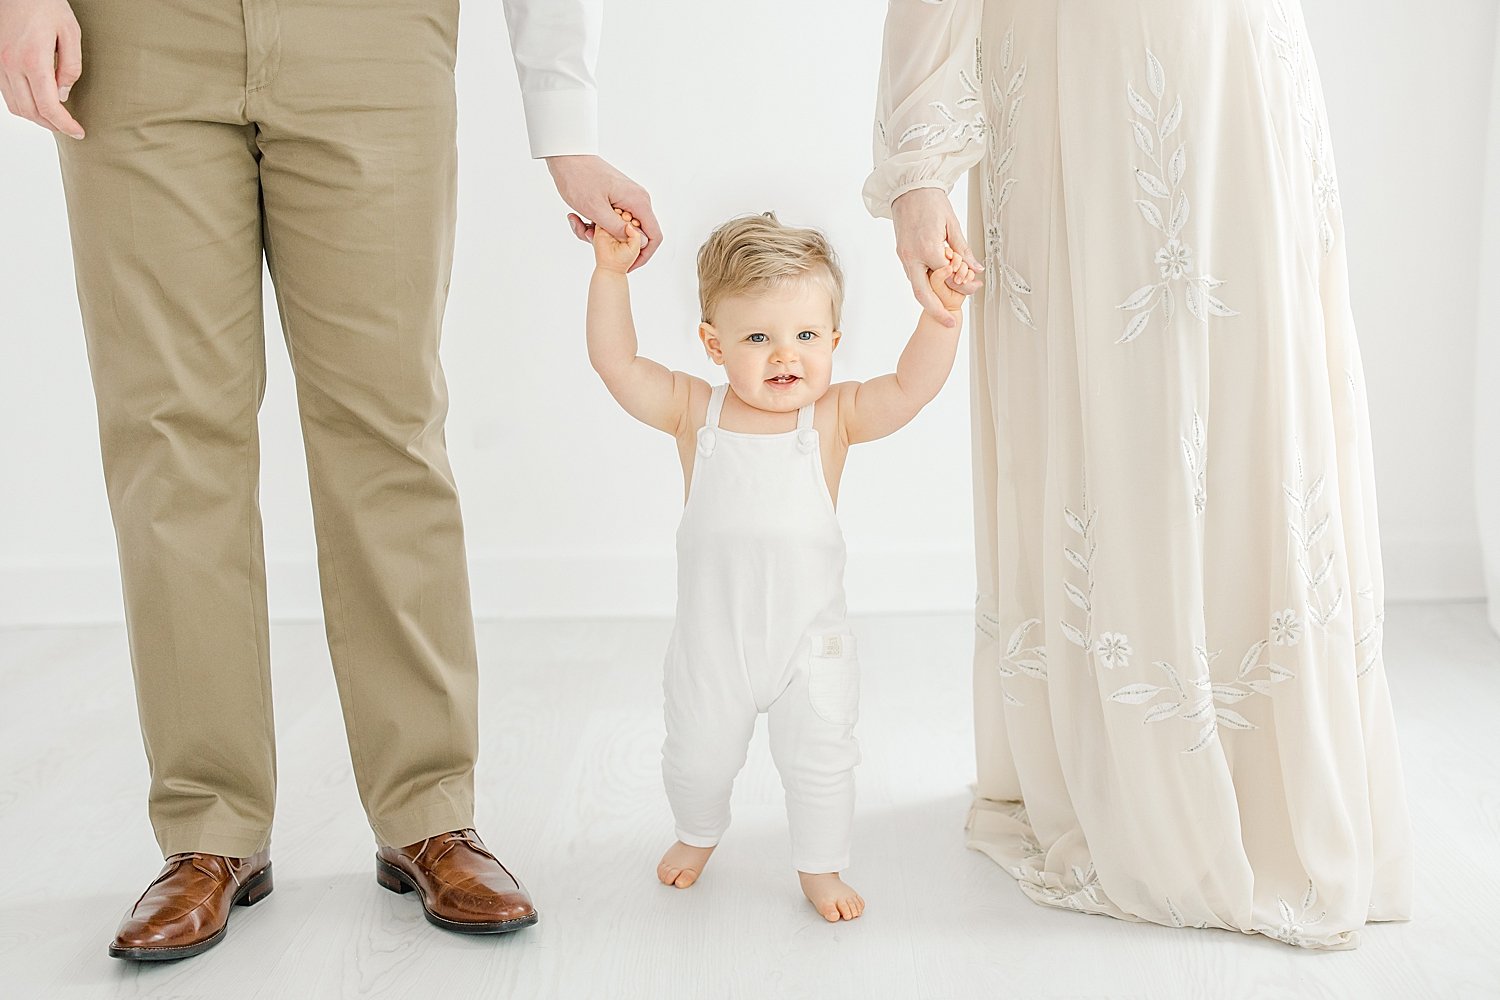 One year old little boy holding his Mom and Dad's hands walking. Photo by Kristin Wood Photography.